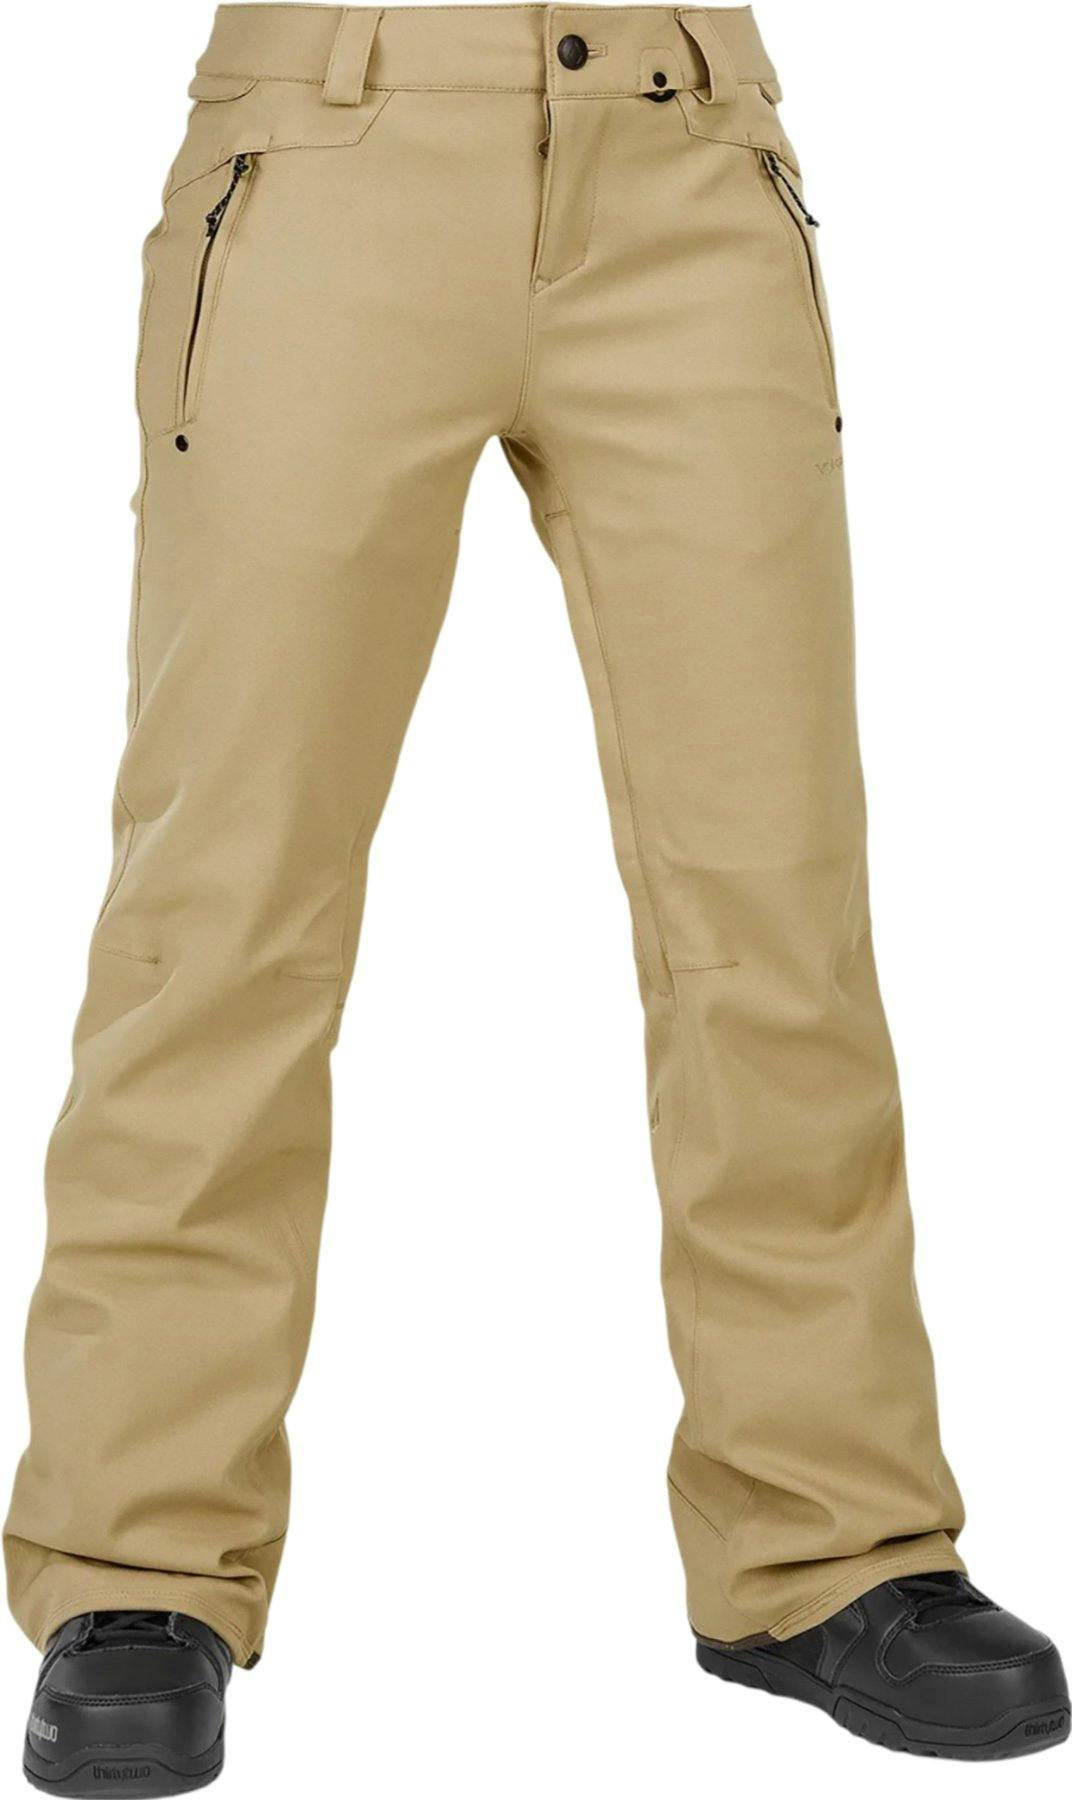 Product image for Species Stretch Trousers - Women's